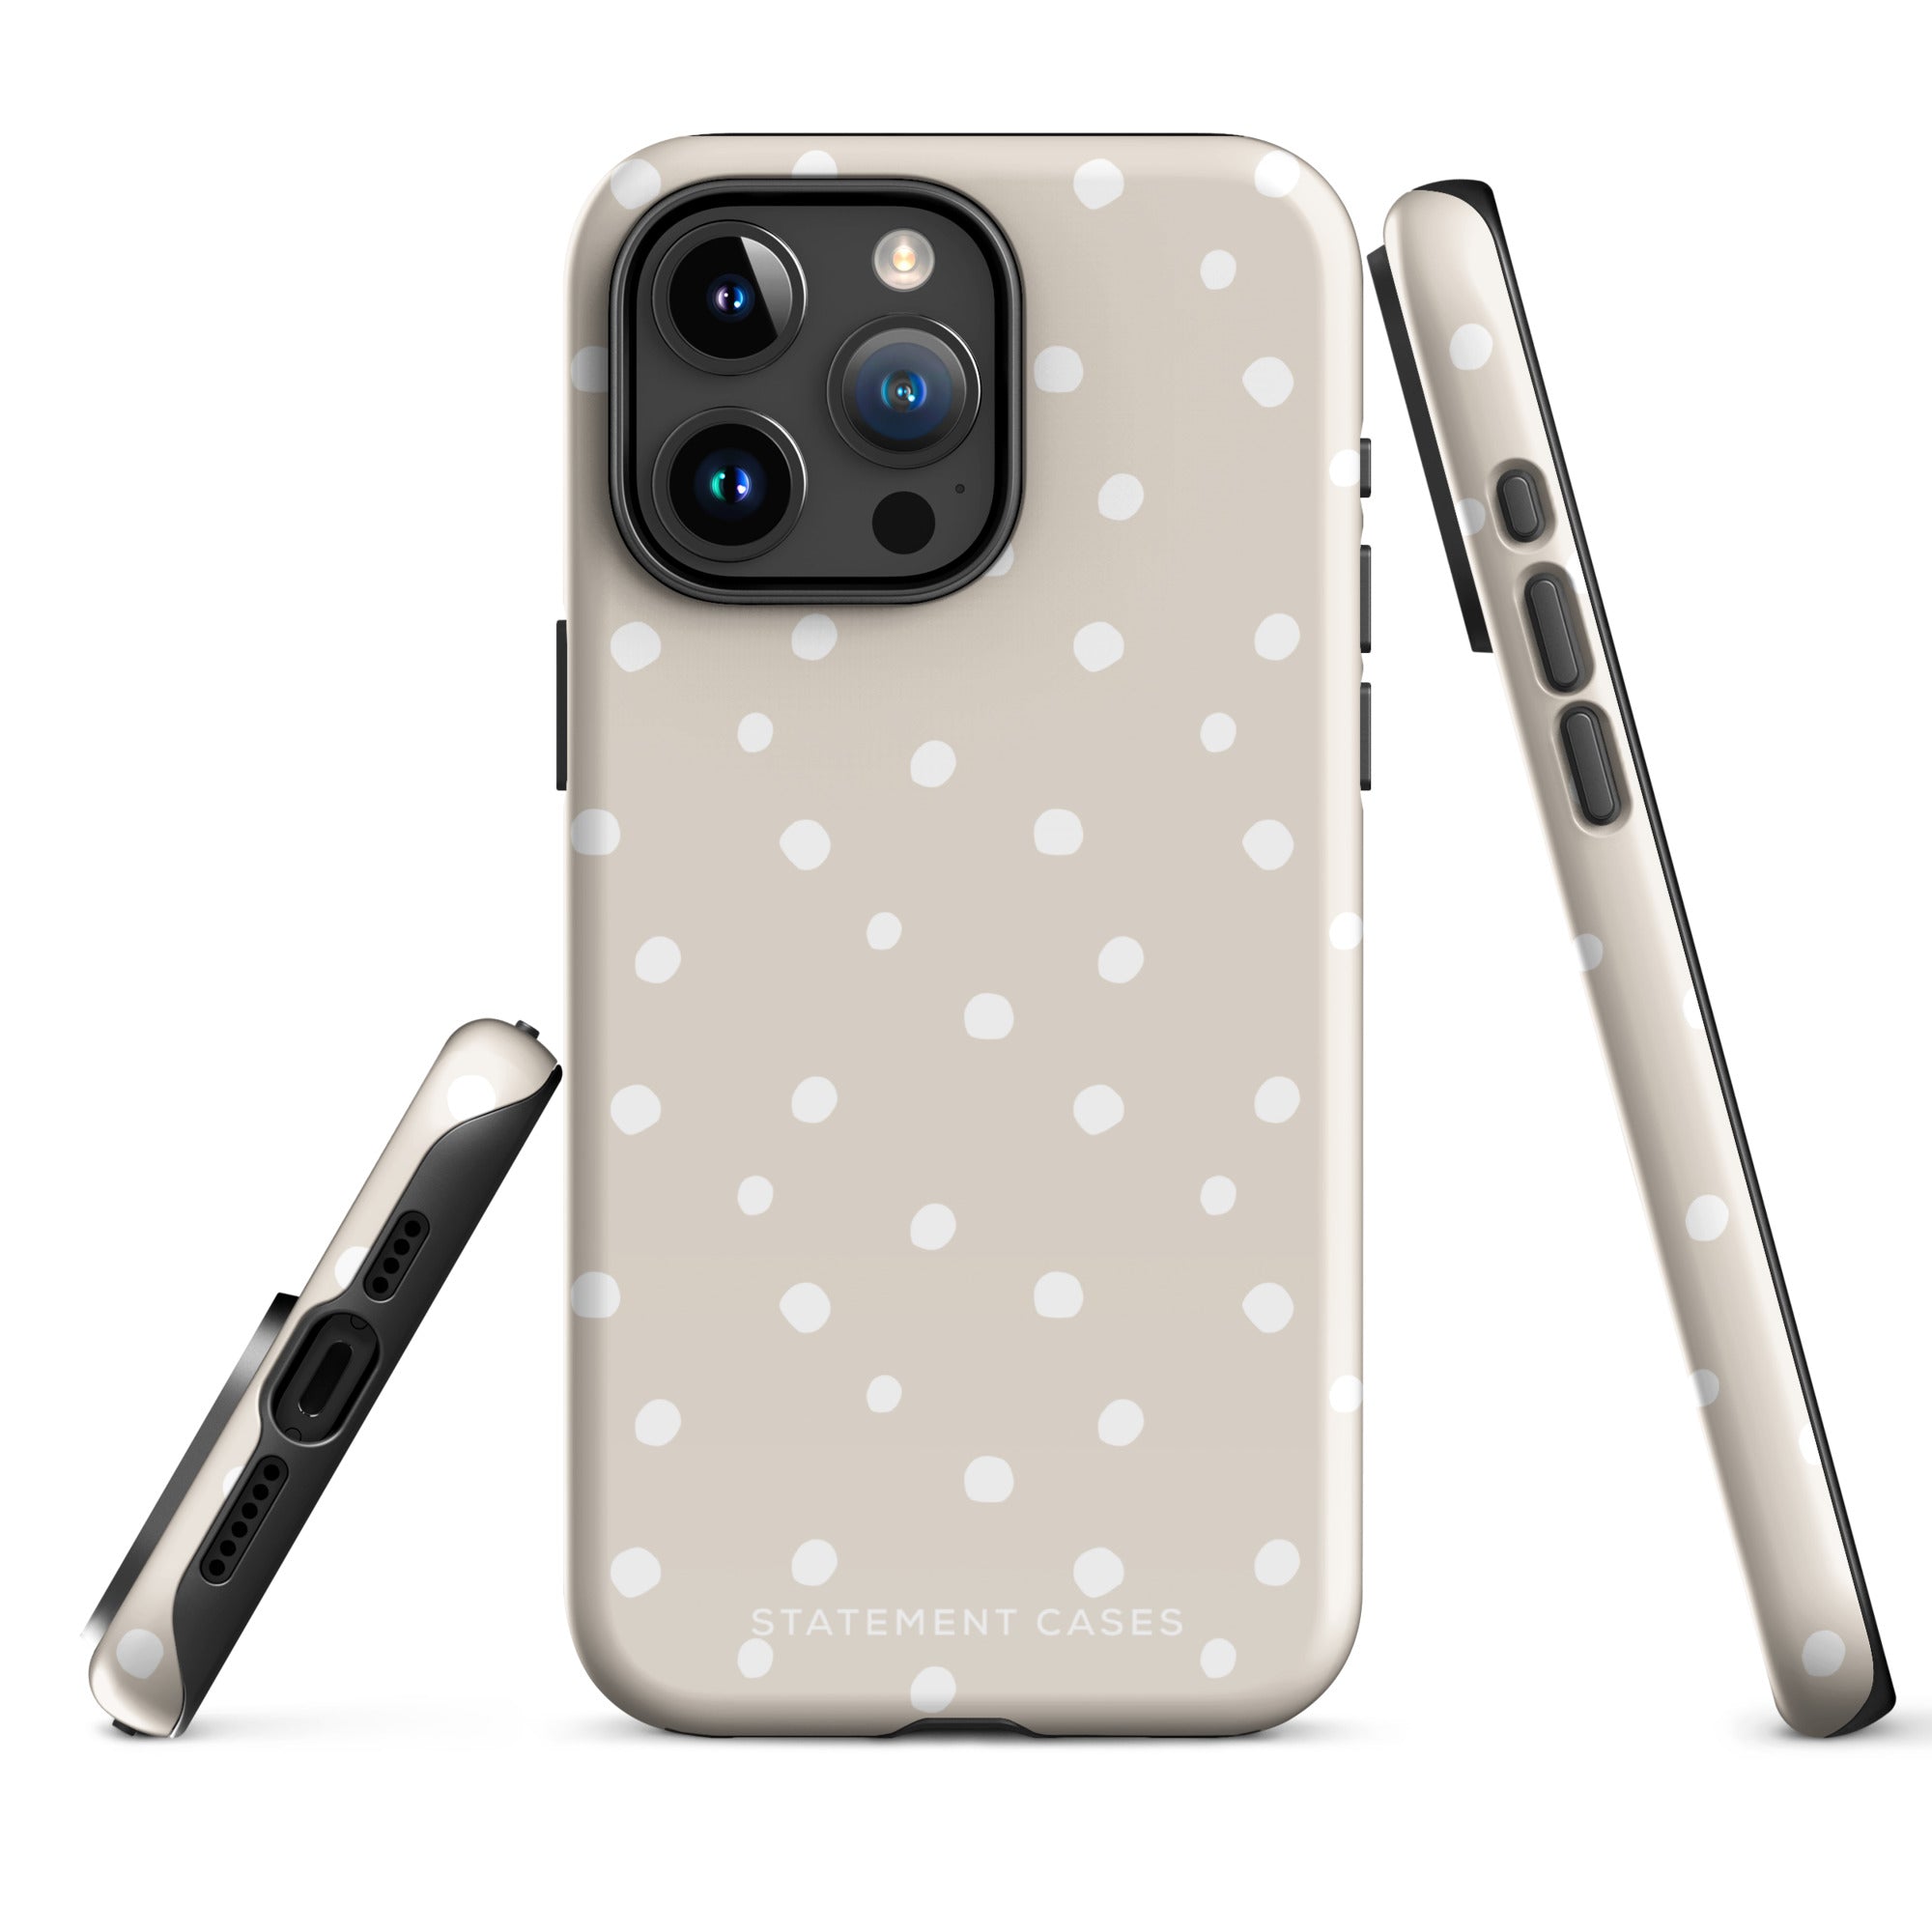 A beige Classic Nude for iPhone case with white polka dots, designed for the iPhone 15 Pro Max, covering the back of a phone with three visible camera lenses and one flash positioned at the upper left corner. This protective iPhone case features "Statement Cases" in small capital letters at the bottom.